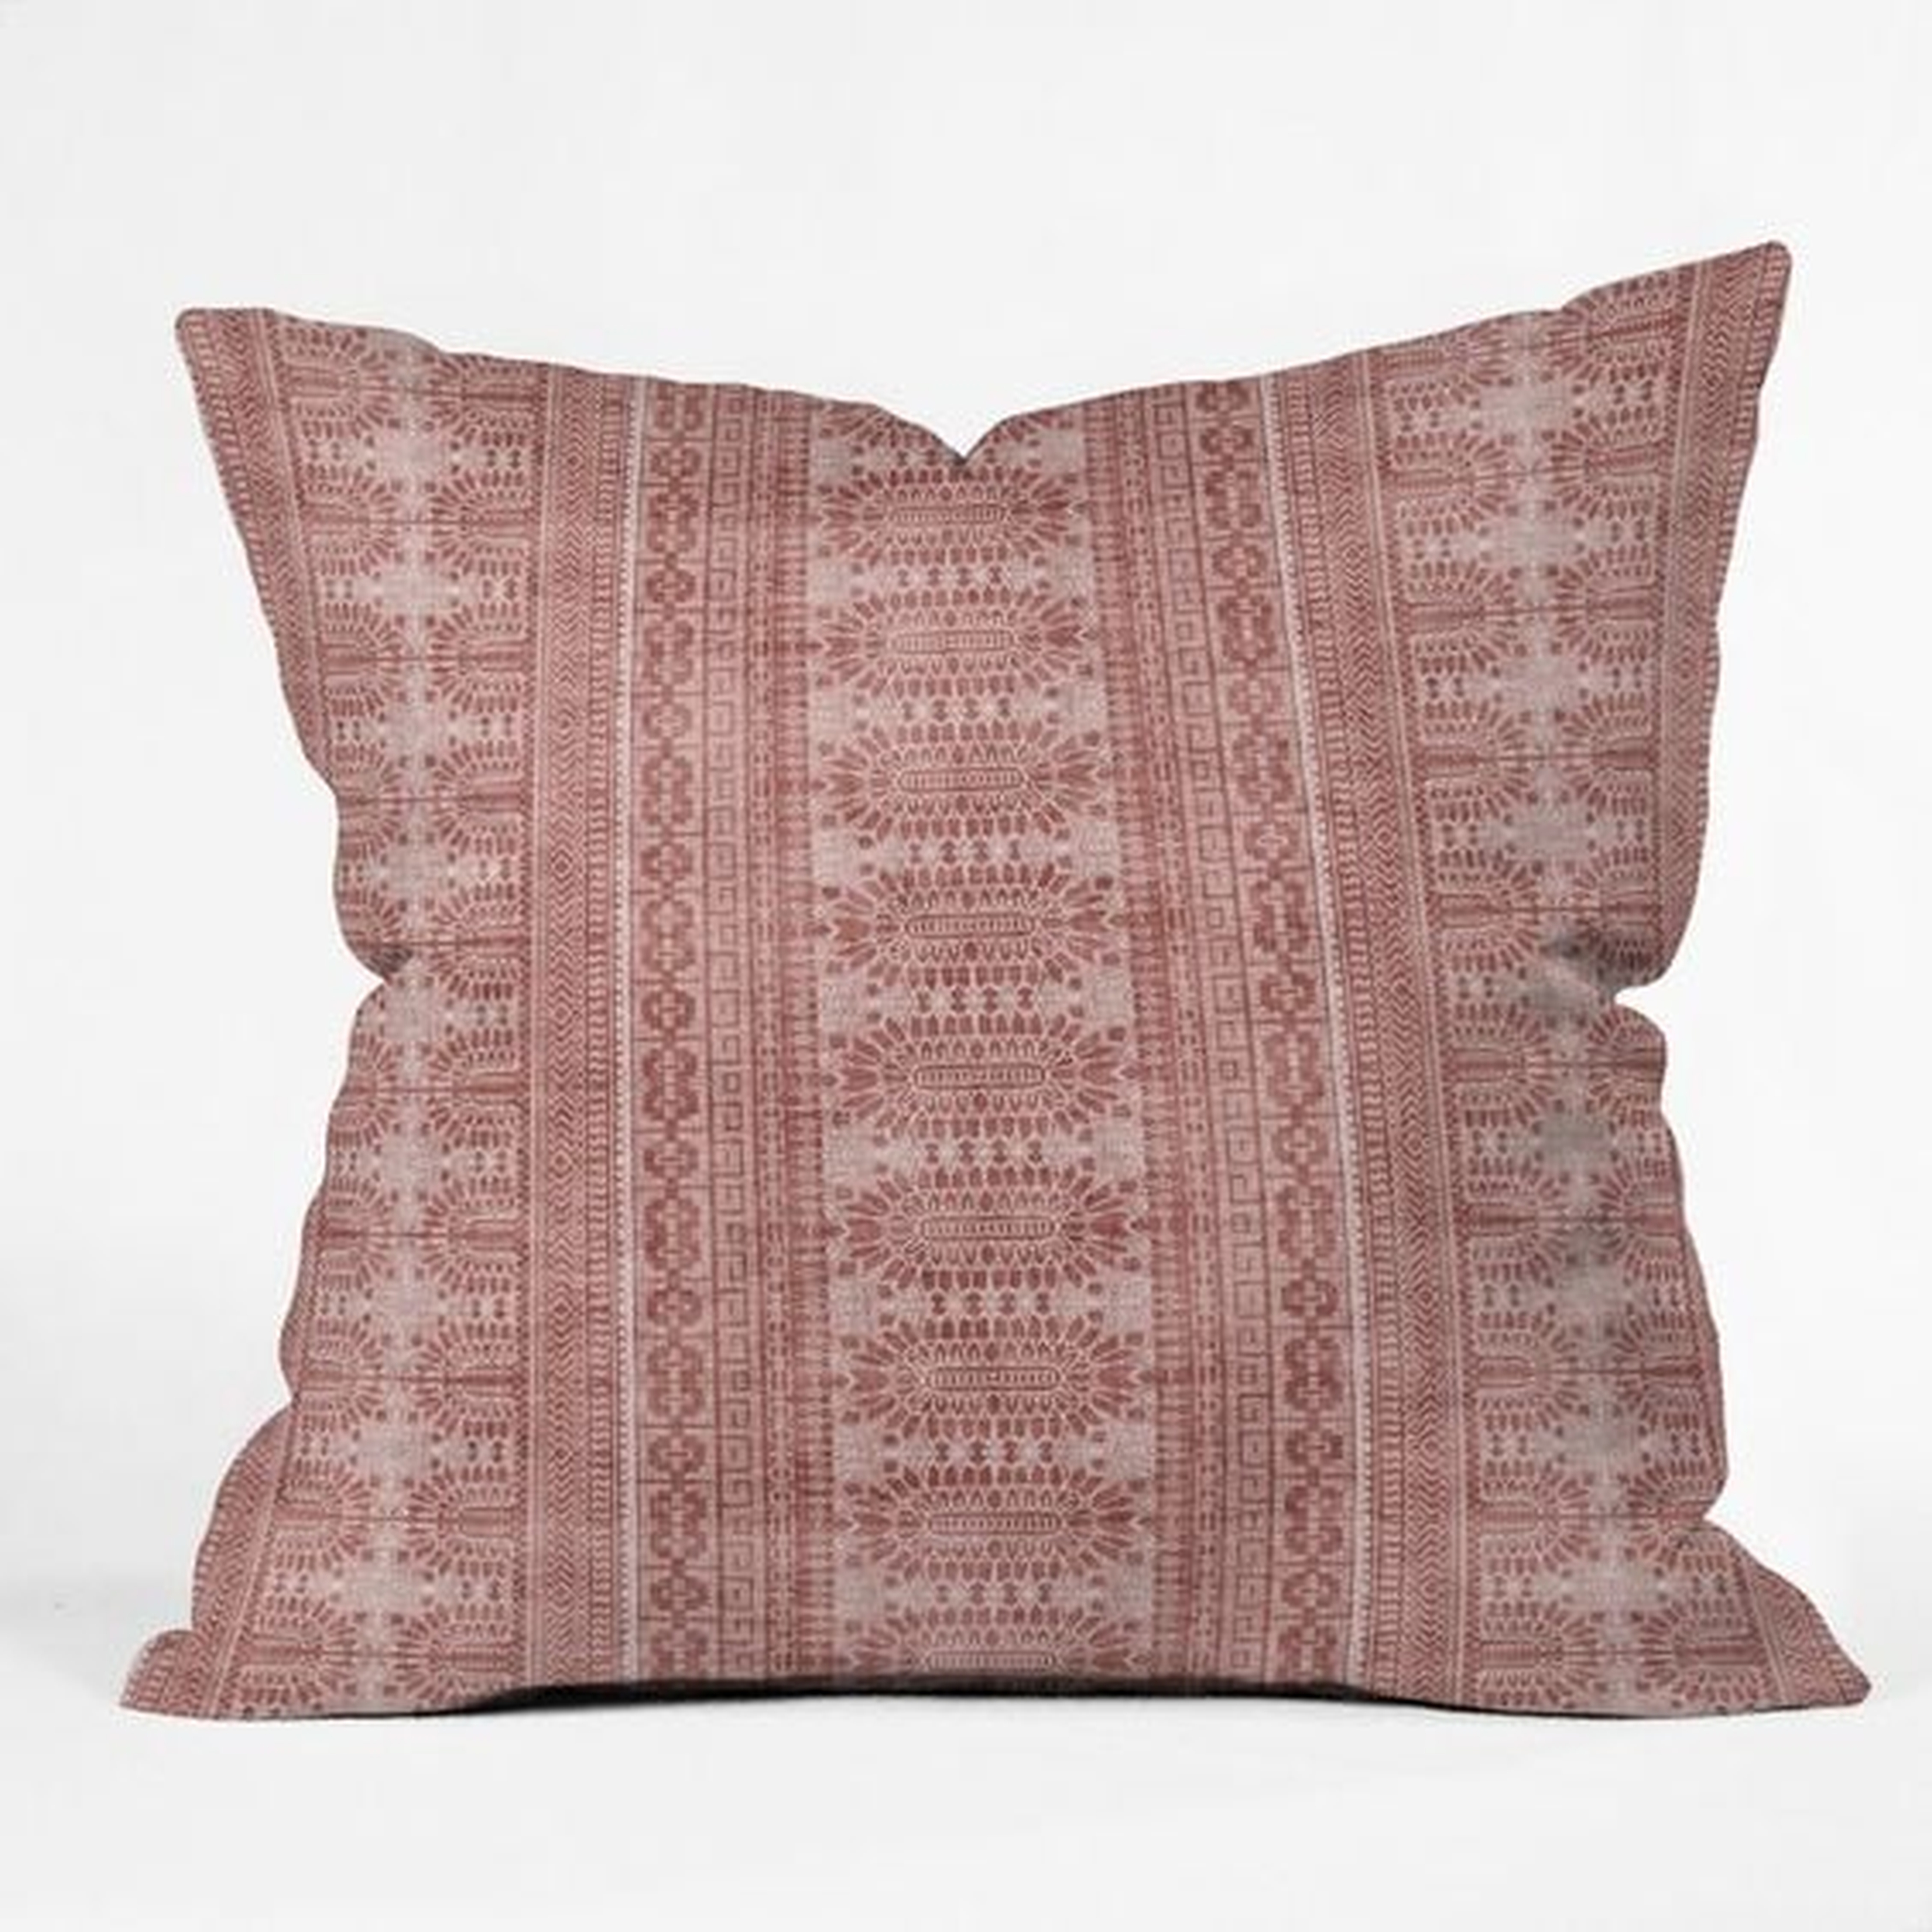 DOTTED BOHEME Throw Pillow - 20" sq. - With Insert - Deny Designs